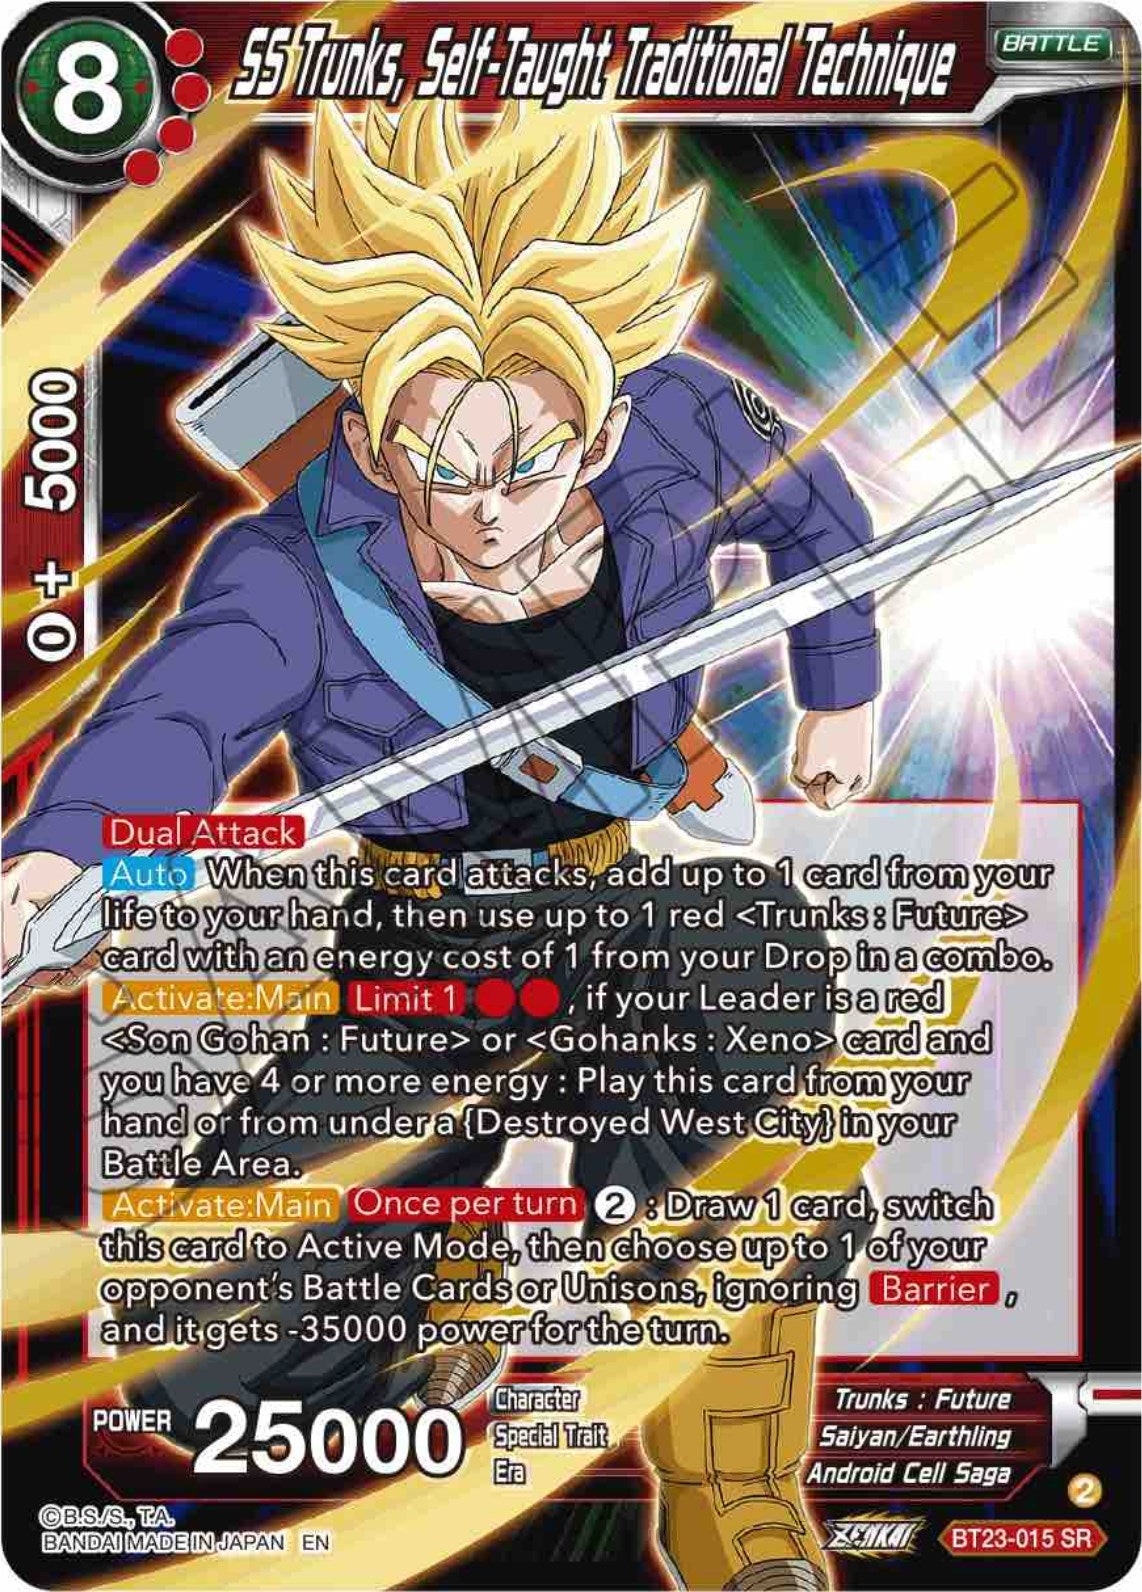 SS Trunks, Self-Taught Traditional Technique (BT23-015) [Perfect Combination] | North Valley Games